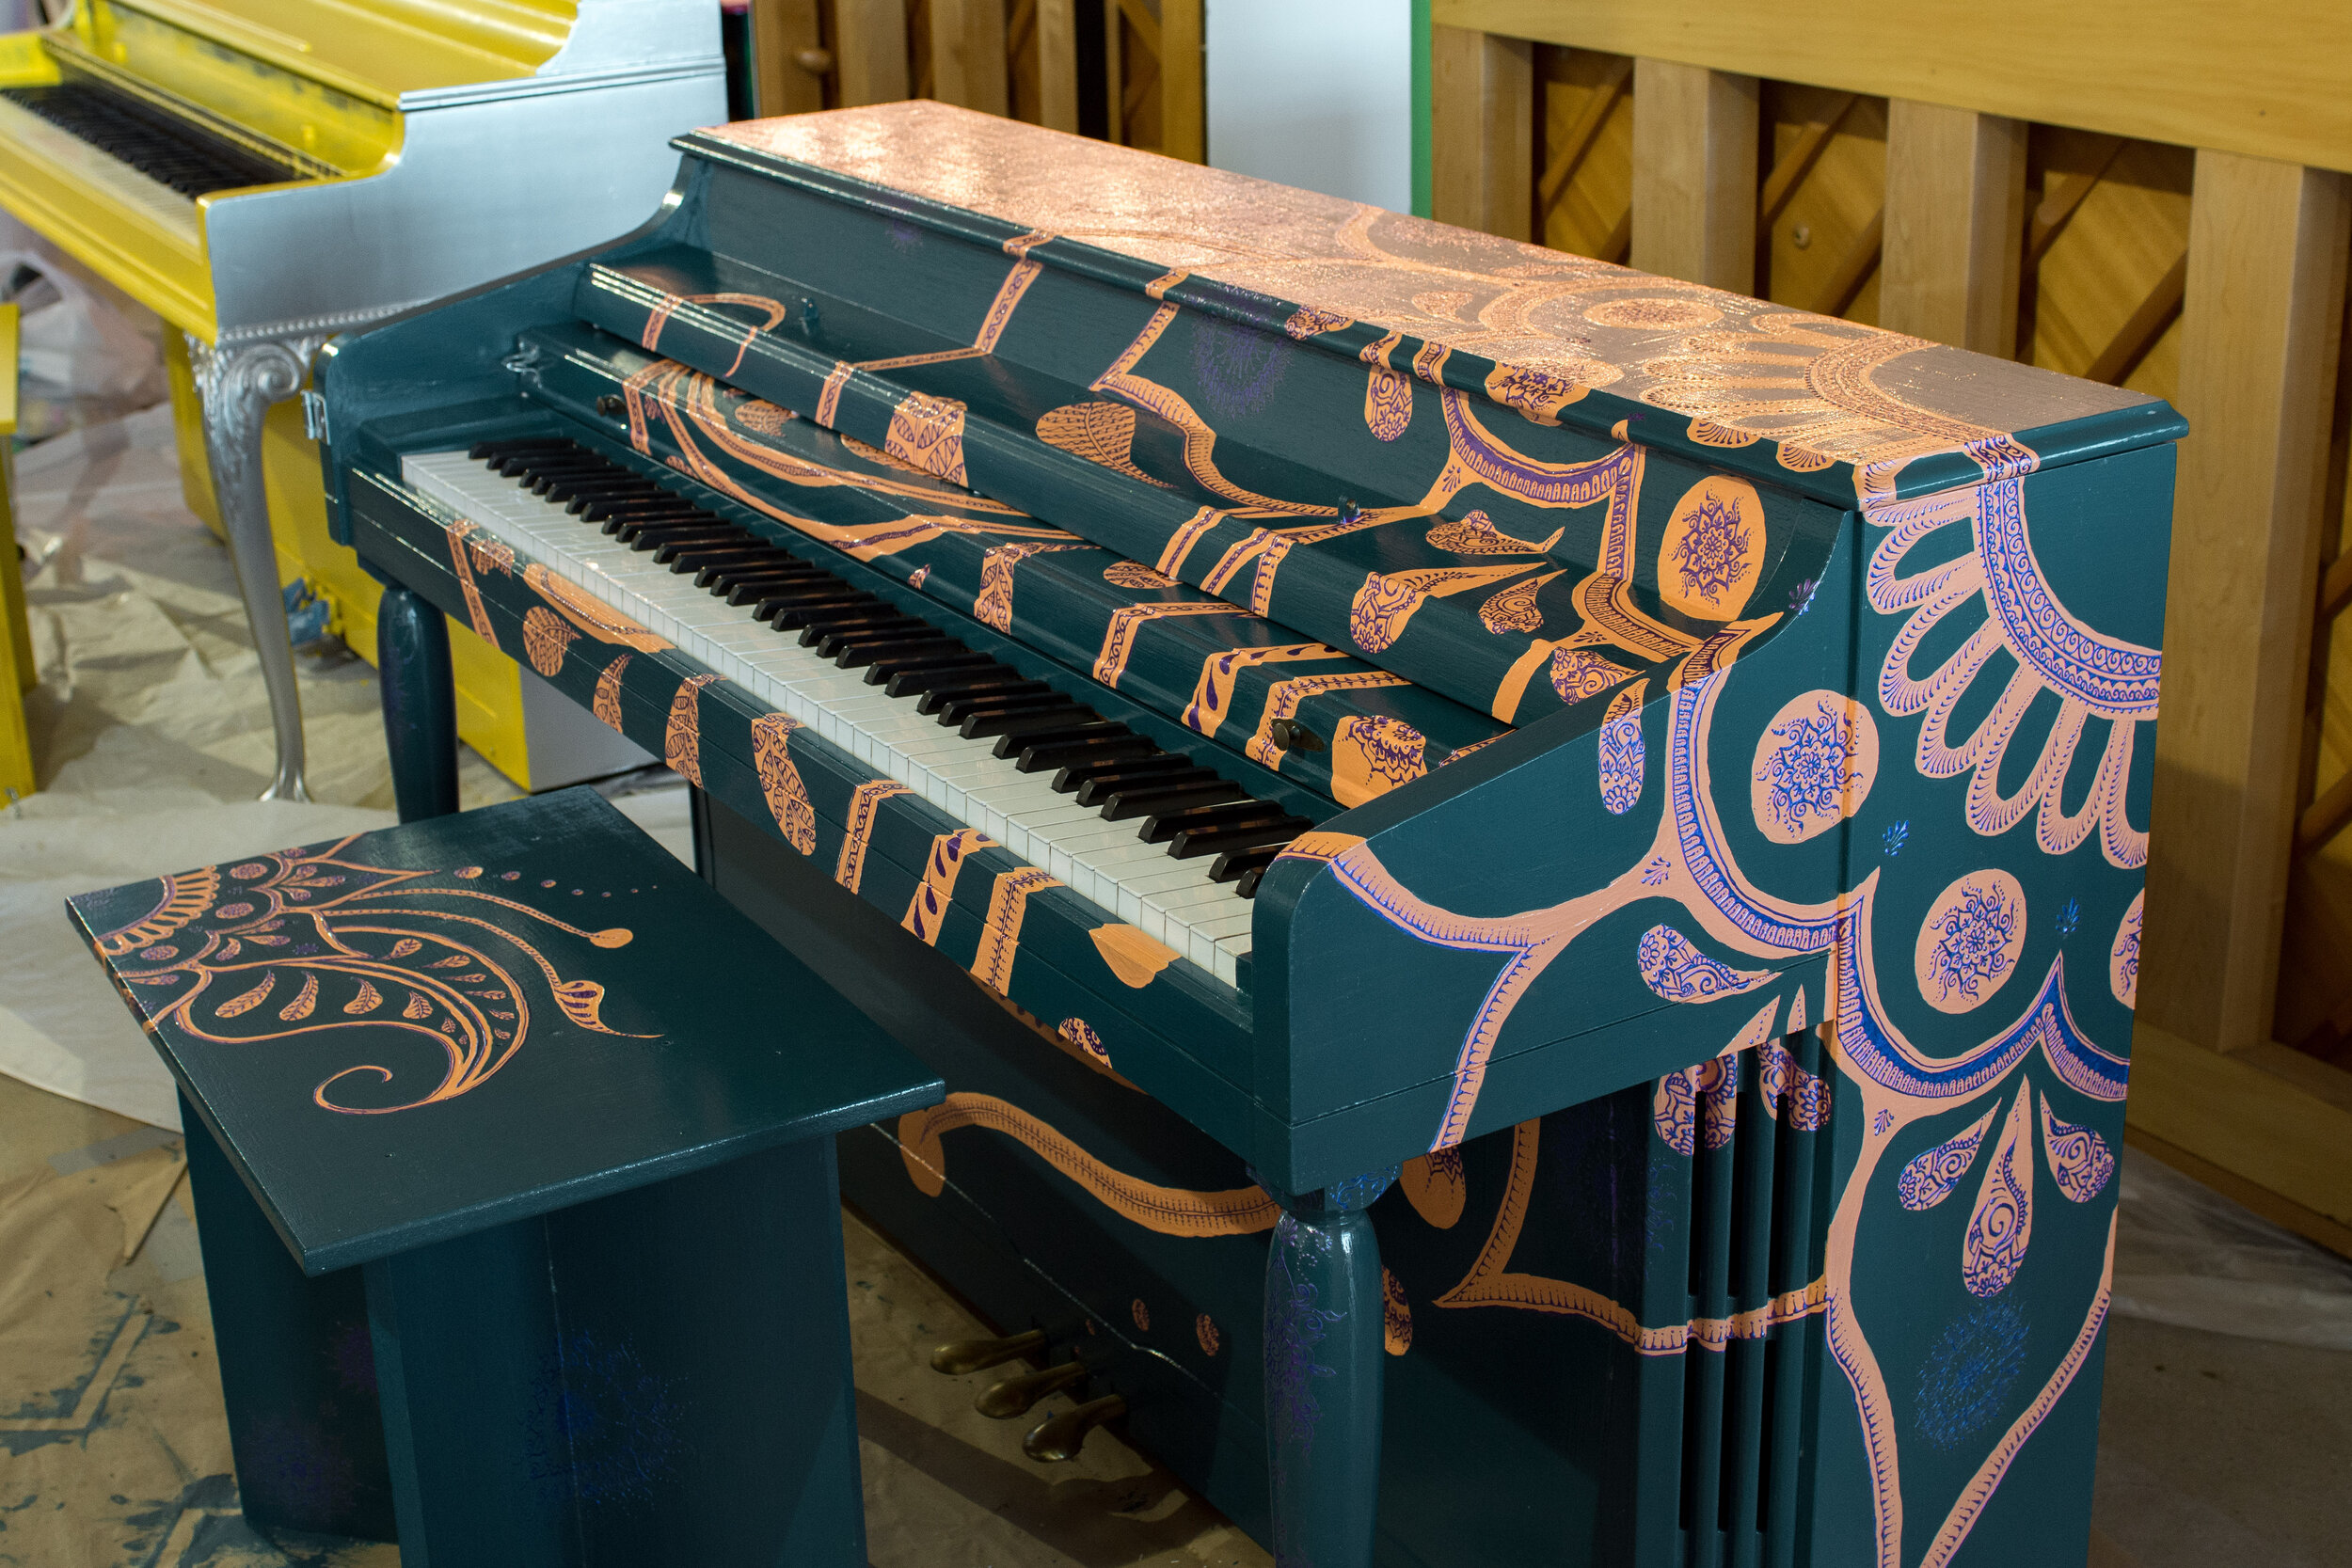  Painted Piano 